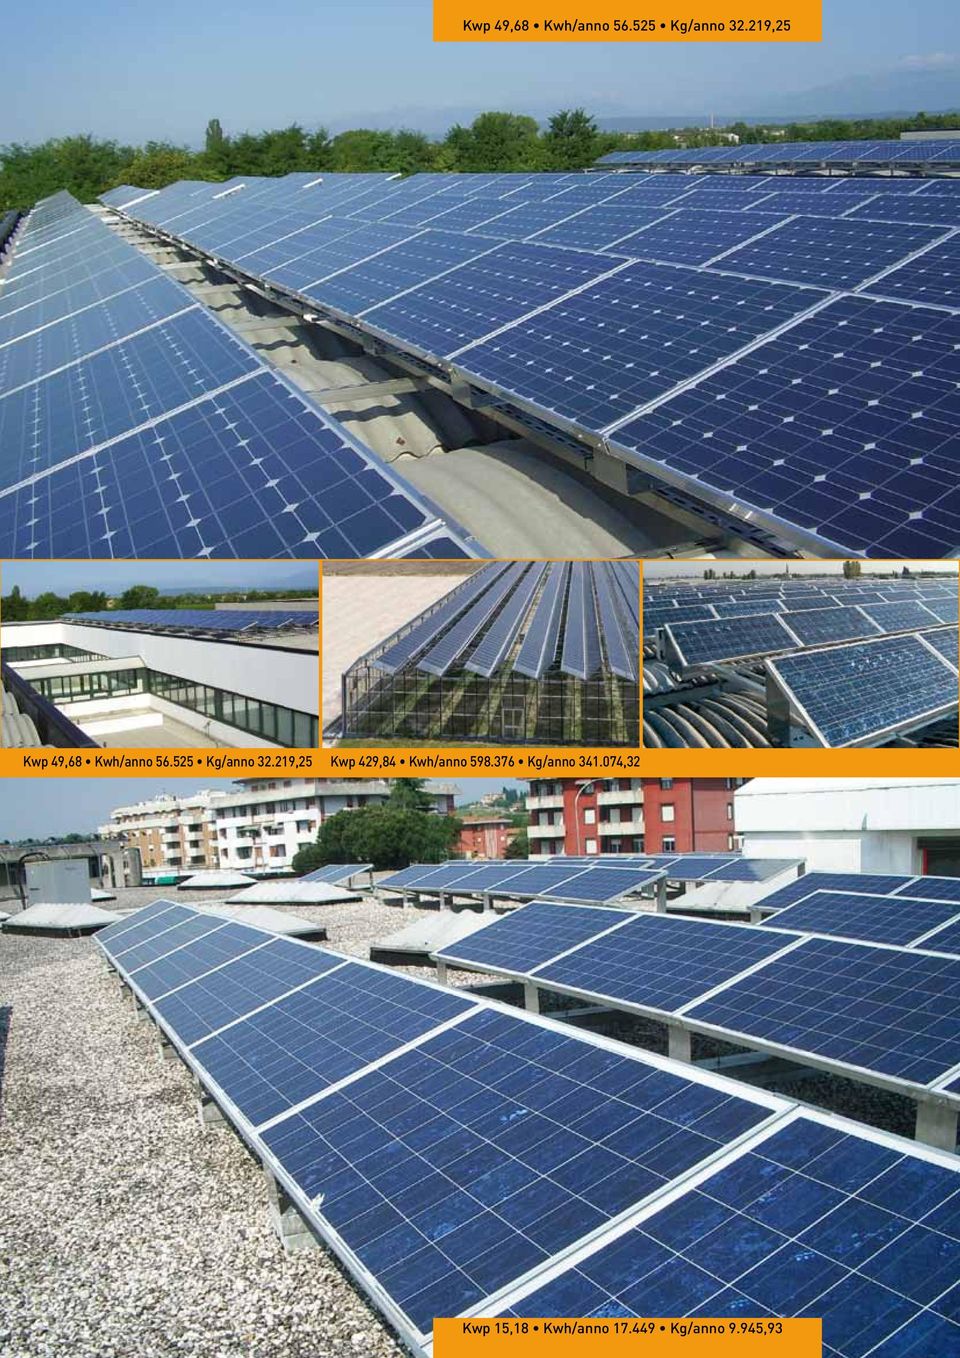 376 Kg/anno 341.074,32 Kwp 15,18 Kwh/anno 17.